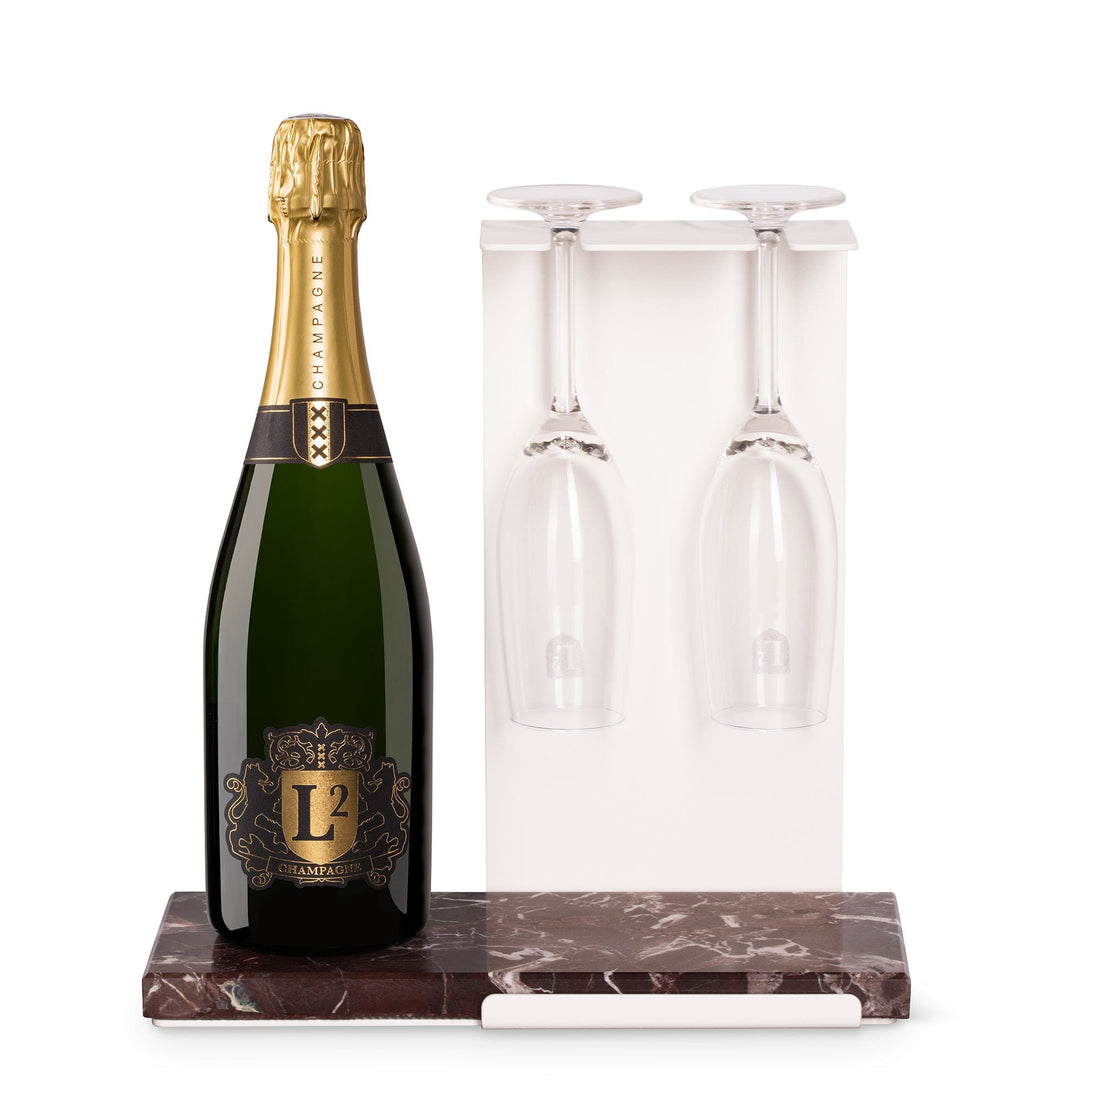 L2 Champagne Brut with Stand|Sustainable|Ecological